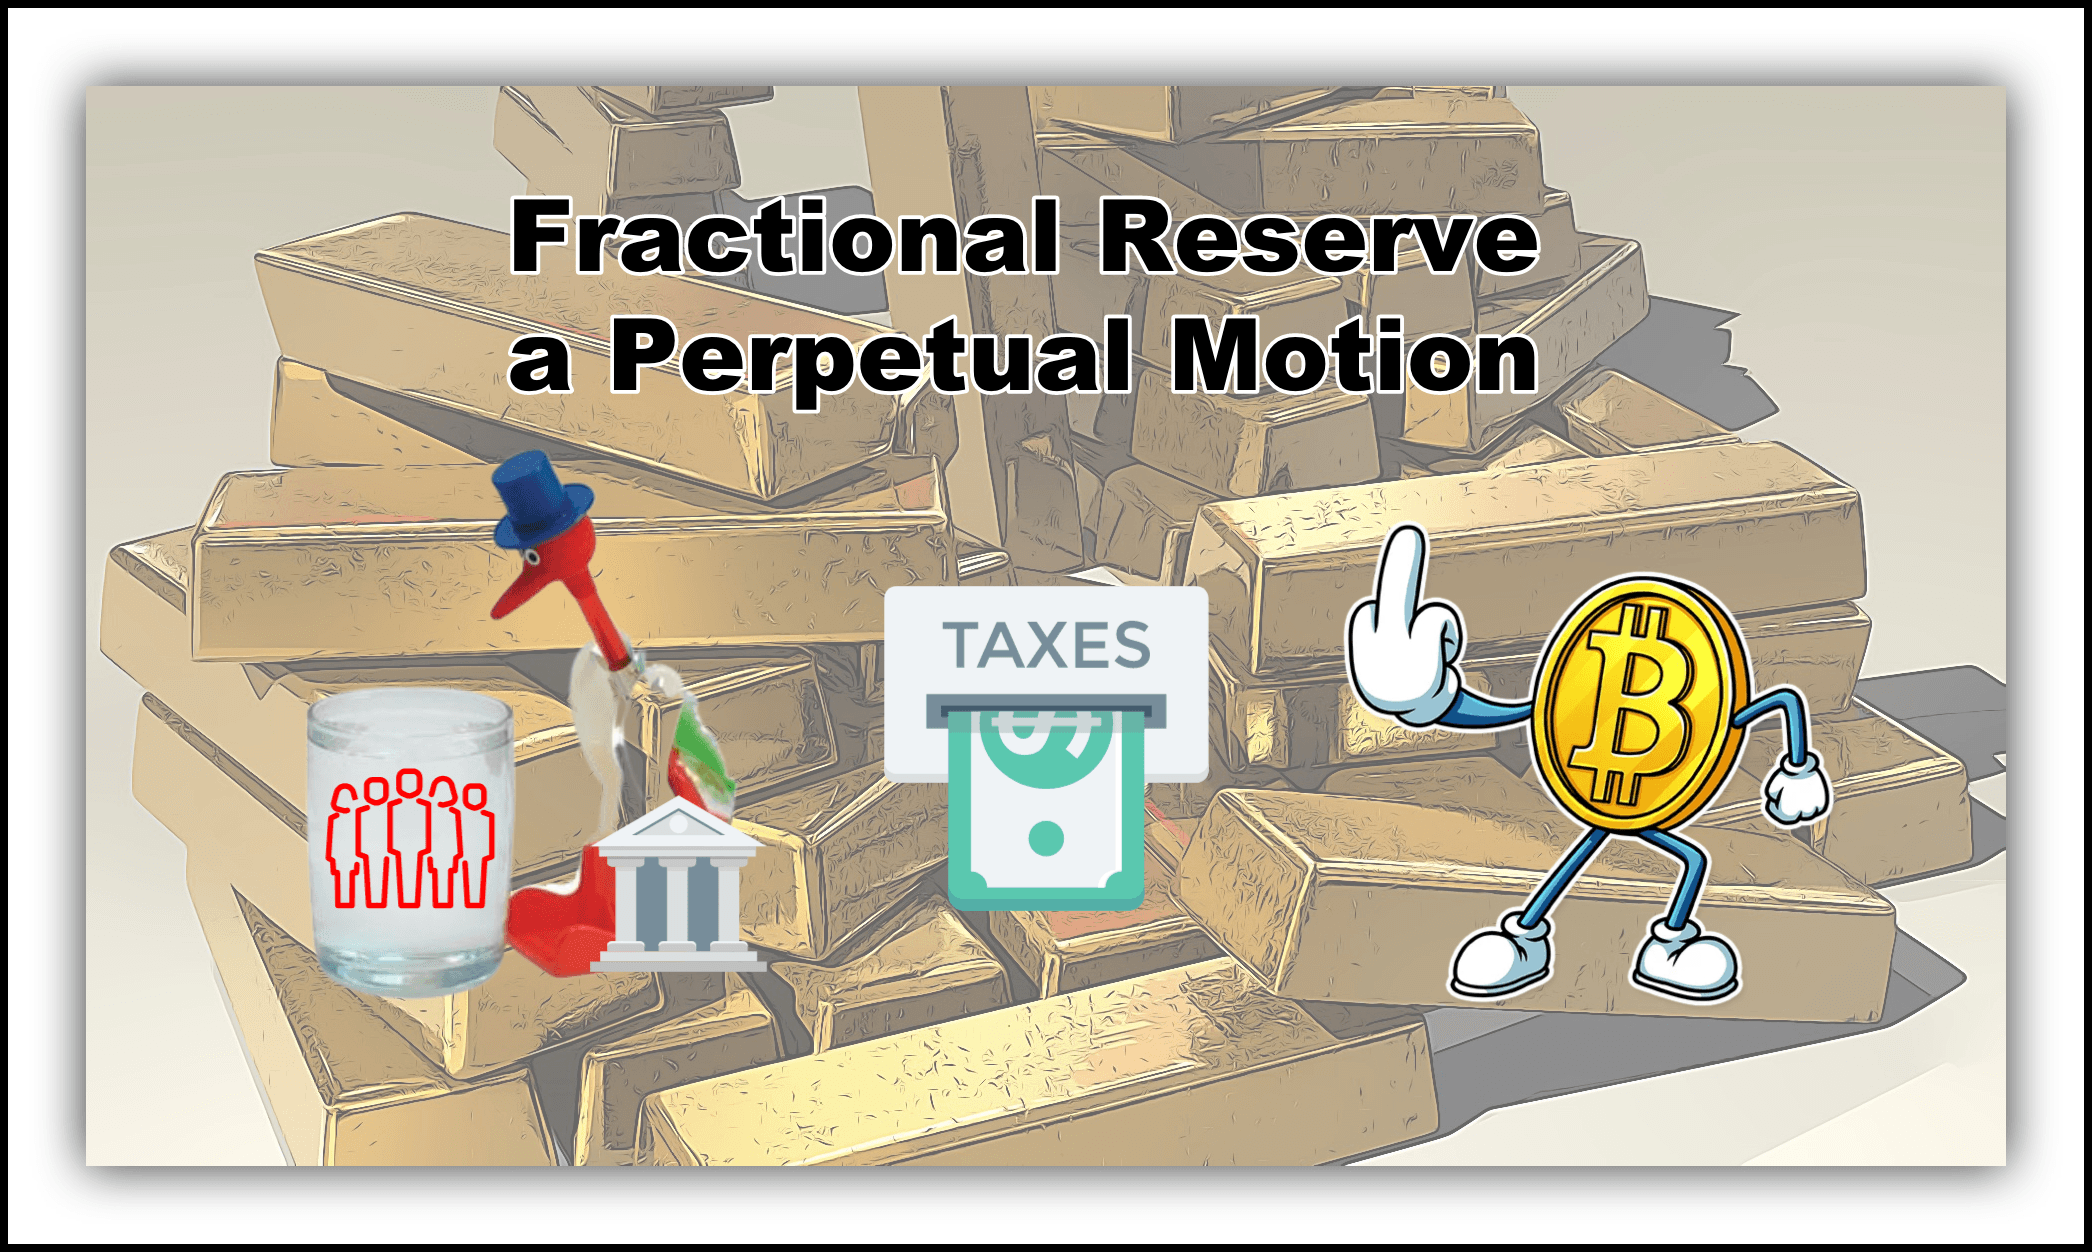 Fractional Reserve a perpetual motion